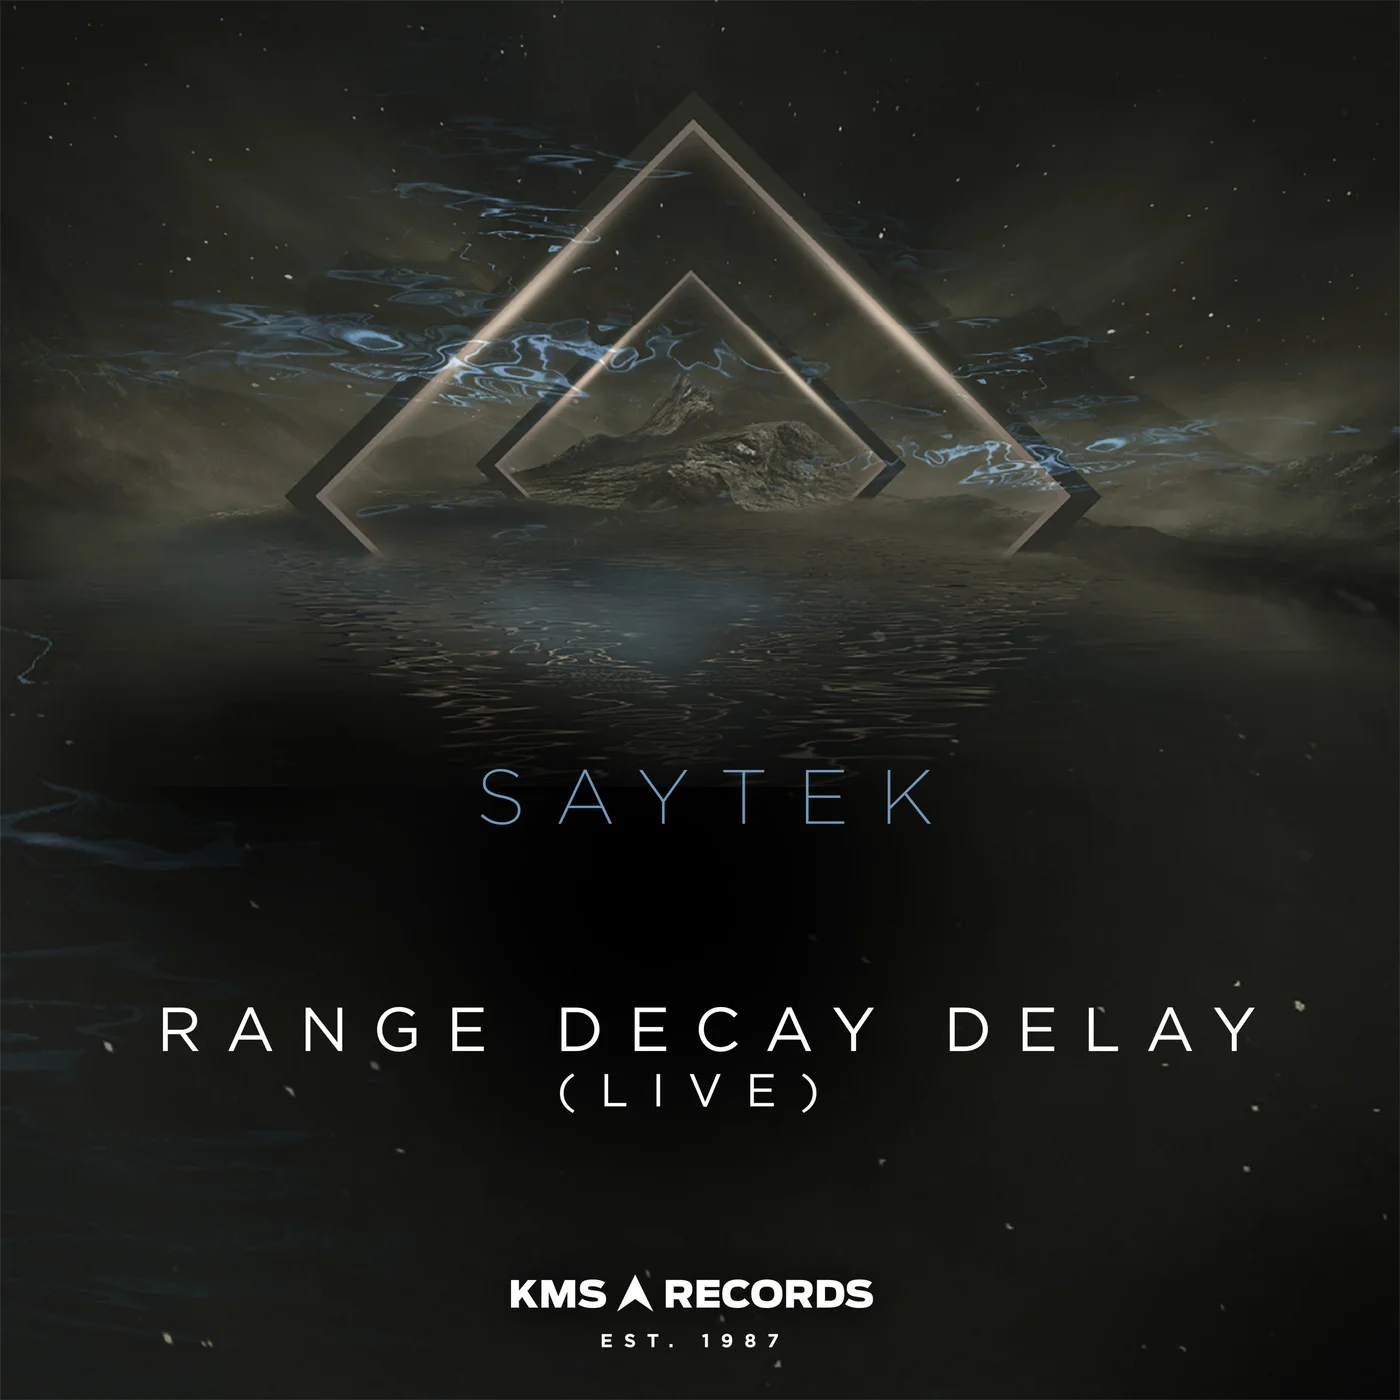 Saytek is set to release “Range Decay Delay (Live)” on Kevin Saunderson’s prestigious KMS Records